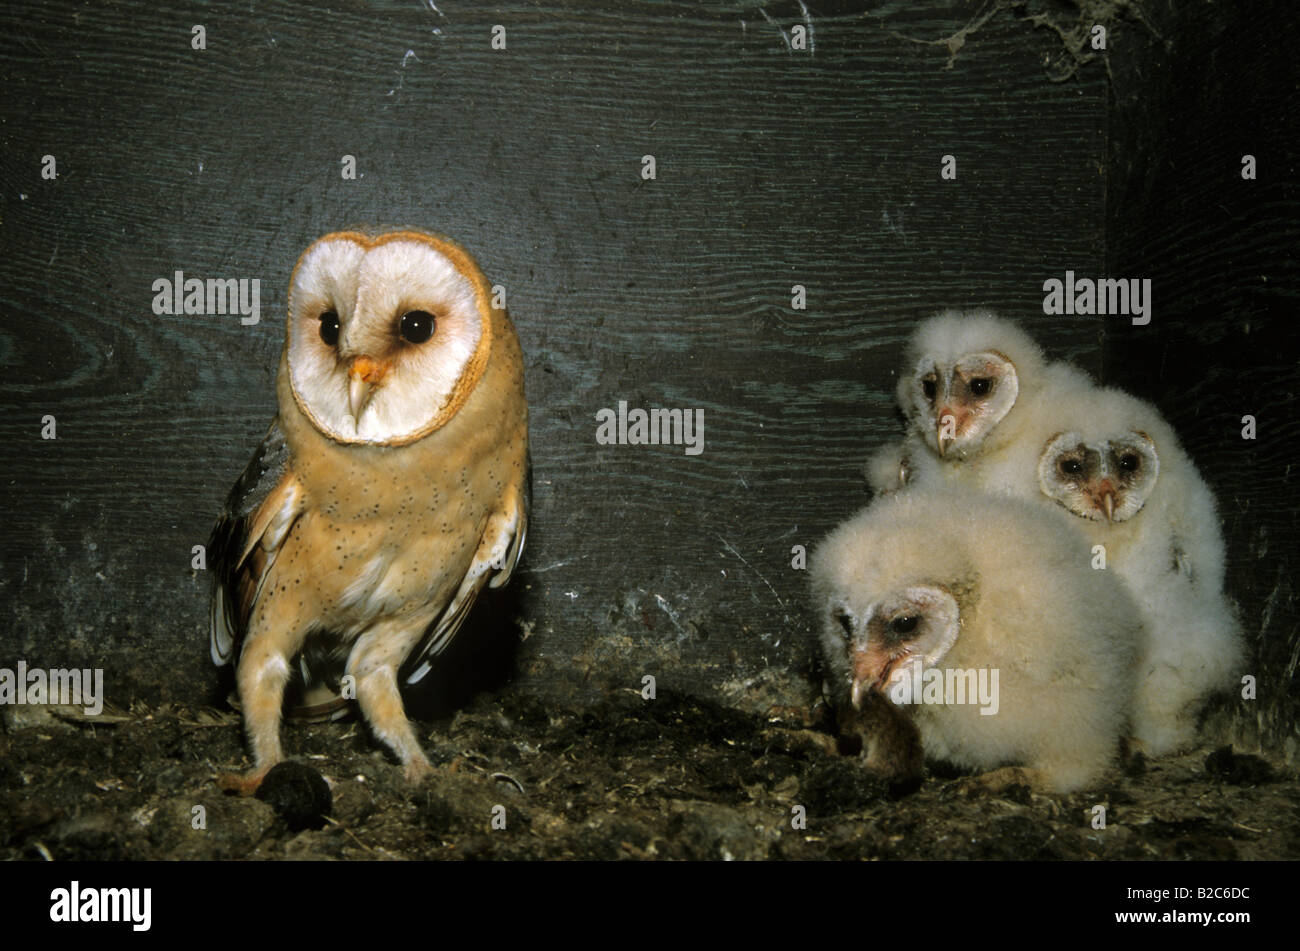 Barn Owls (Tyto alba), Tytonidae family, adult bird with its young after giving them a mouse Stock Photo